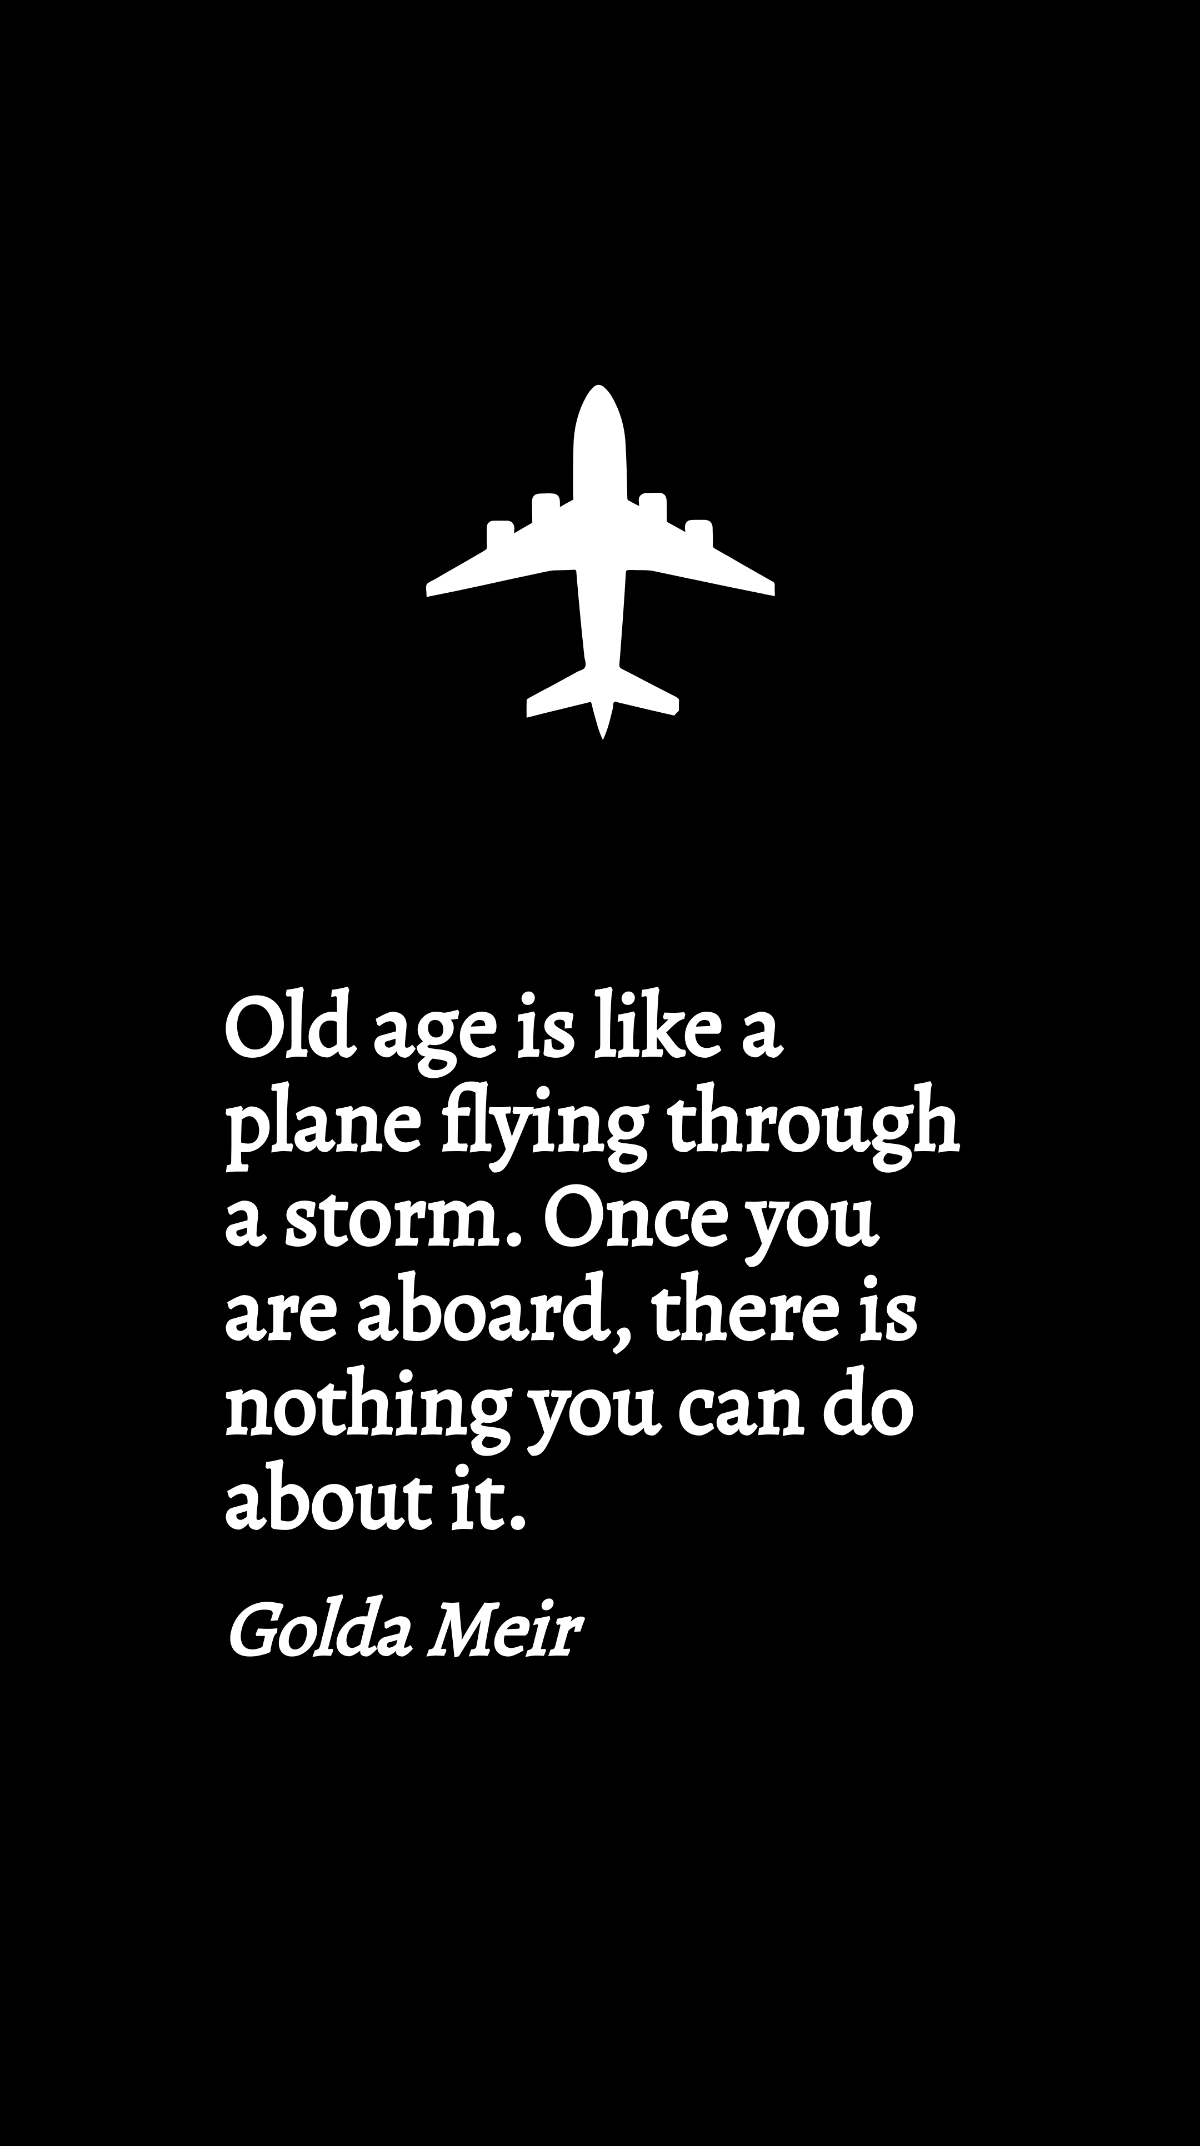 Golda Meir - Old age is like a plane flying through a storm. Once you are aboard, there is nothing you can do about it. Template